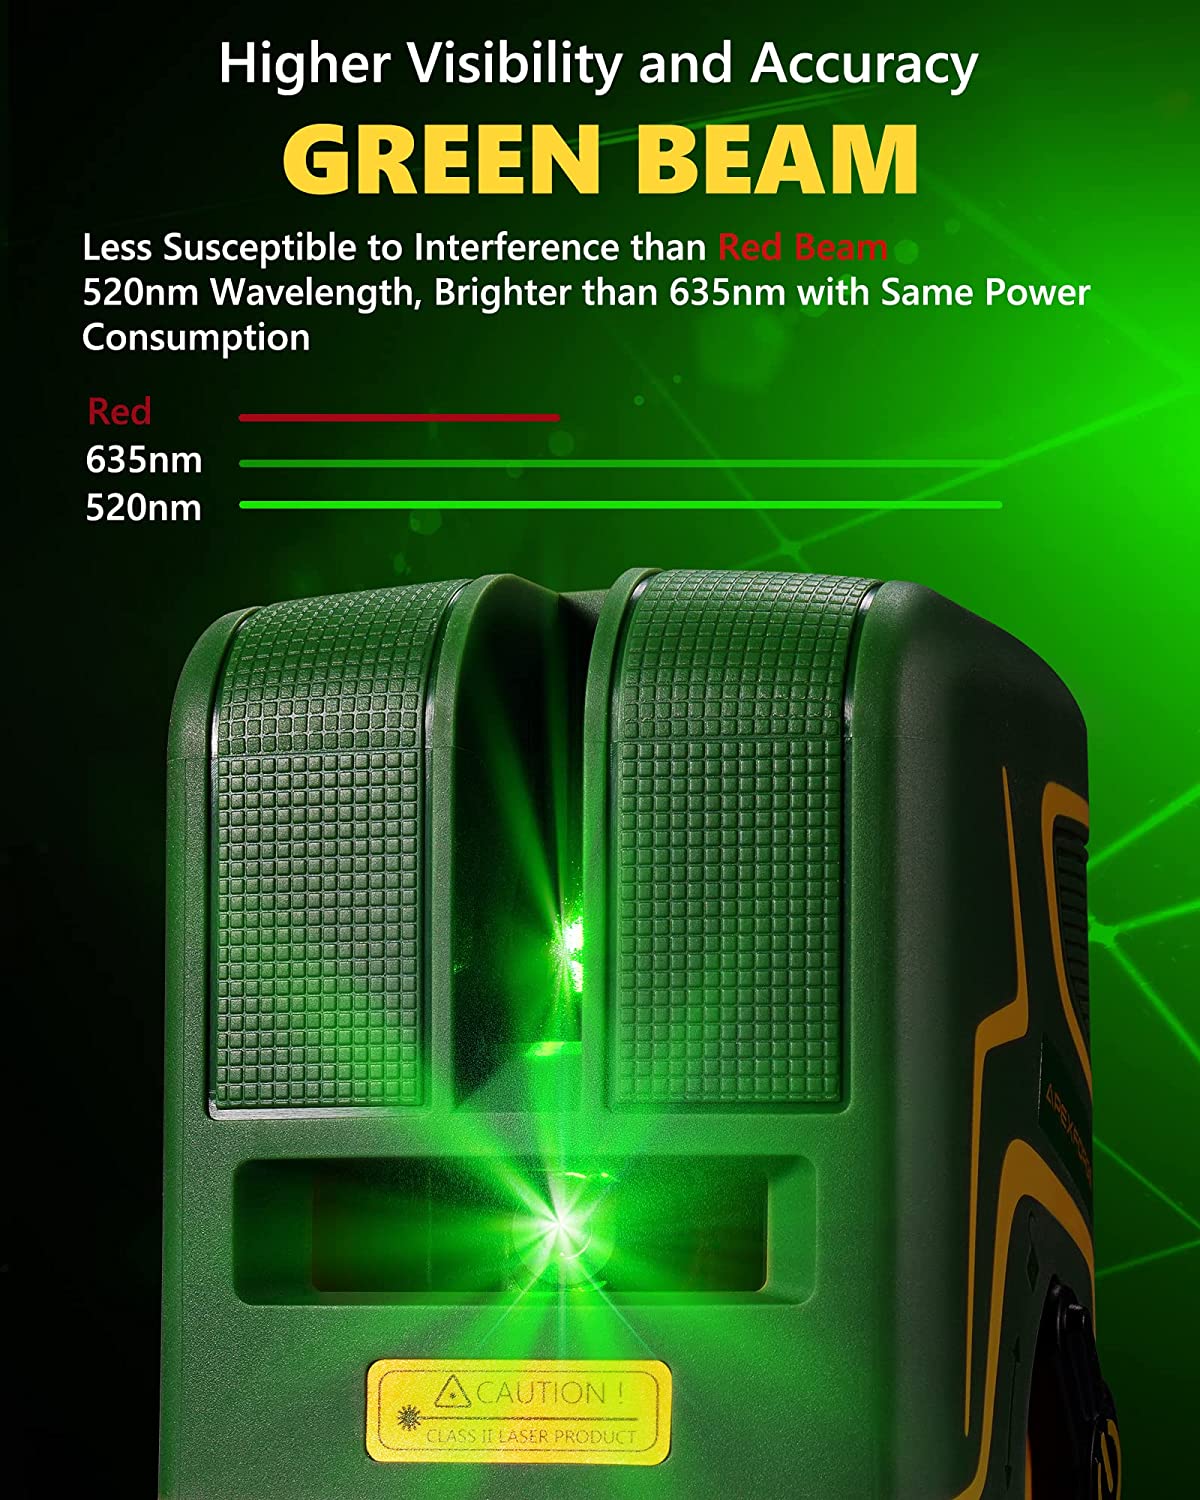 APEXFORGE X2 Pro Cross Line Laser Level, with Expansion Angle, Type-C  Rechargeable Battery, Selectable Green Beams, Self-leveling & Manual Mode,  197ft Pulse Mode - Coupon Codes, Promo Codes, Daily Deals, Save Money